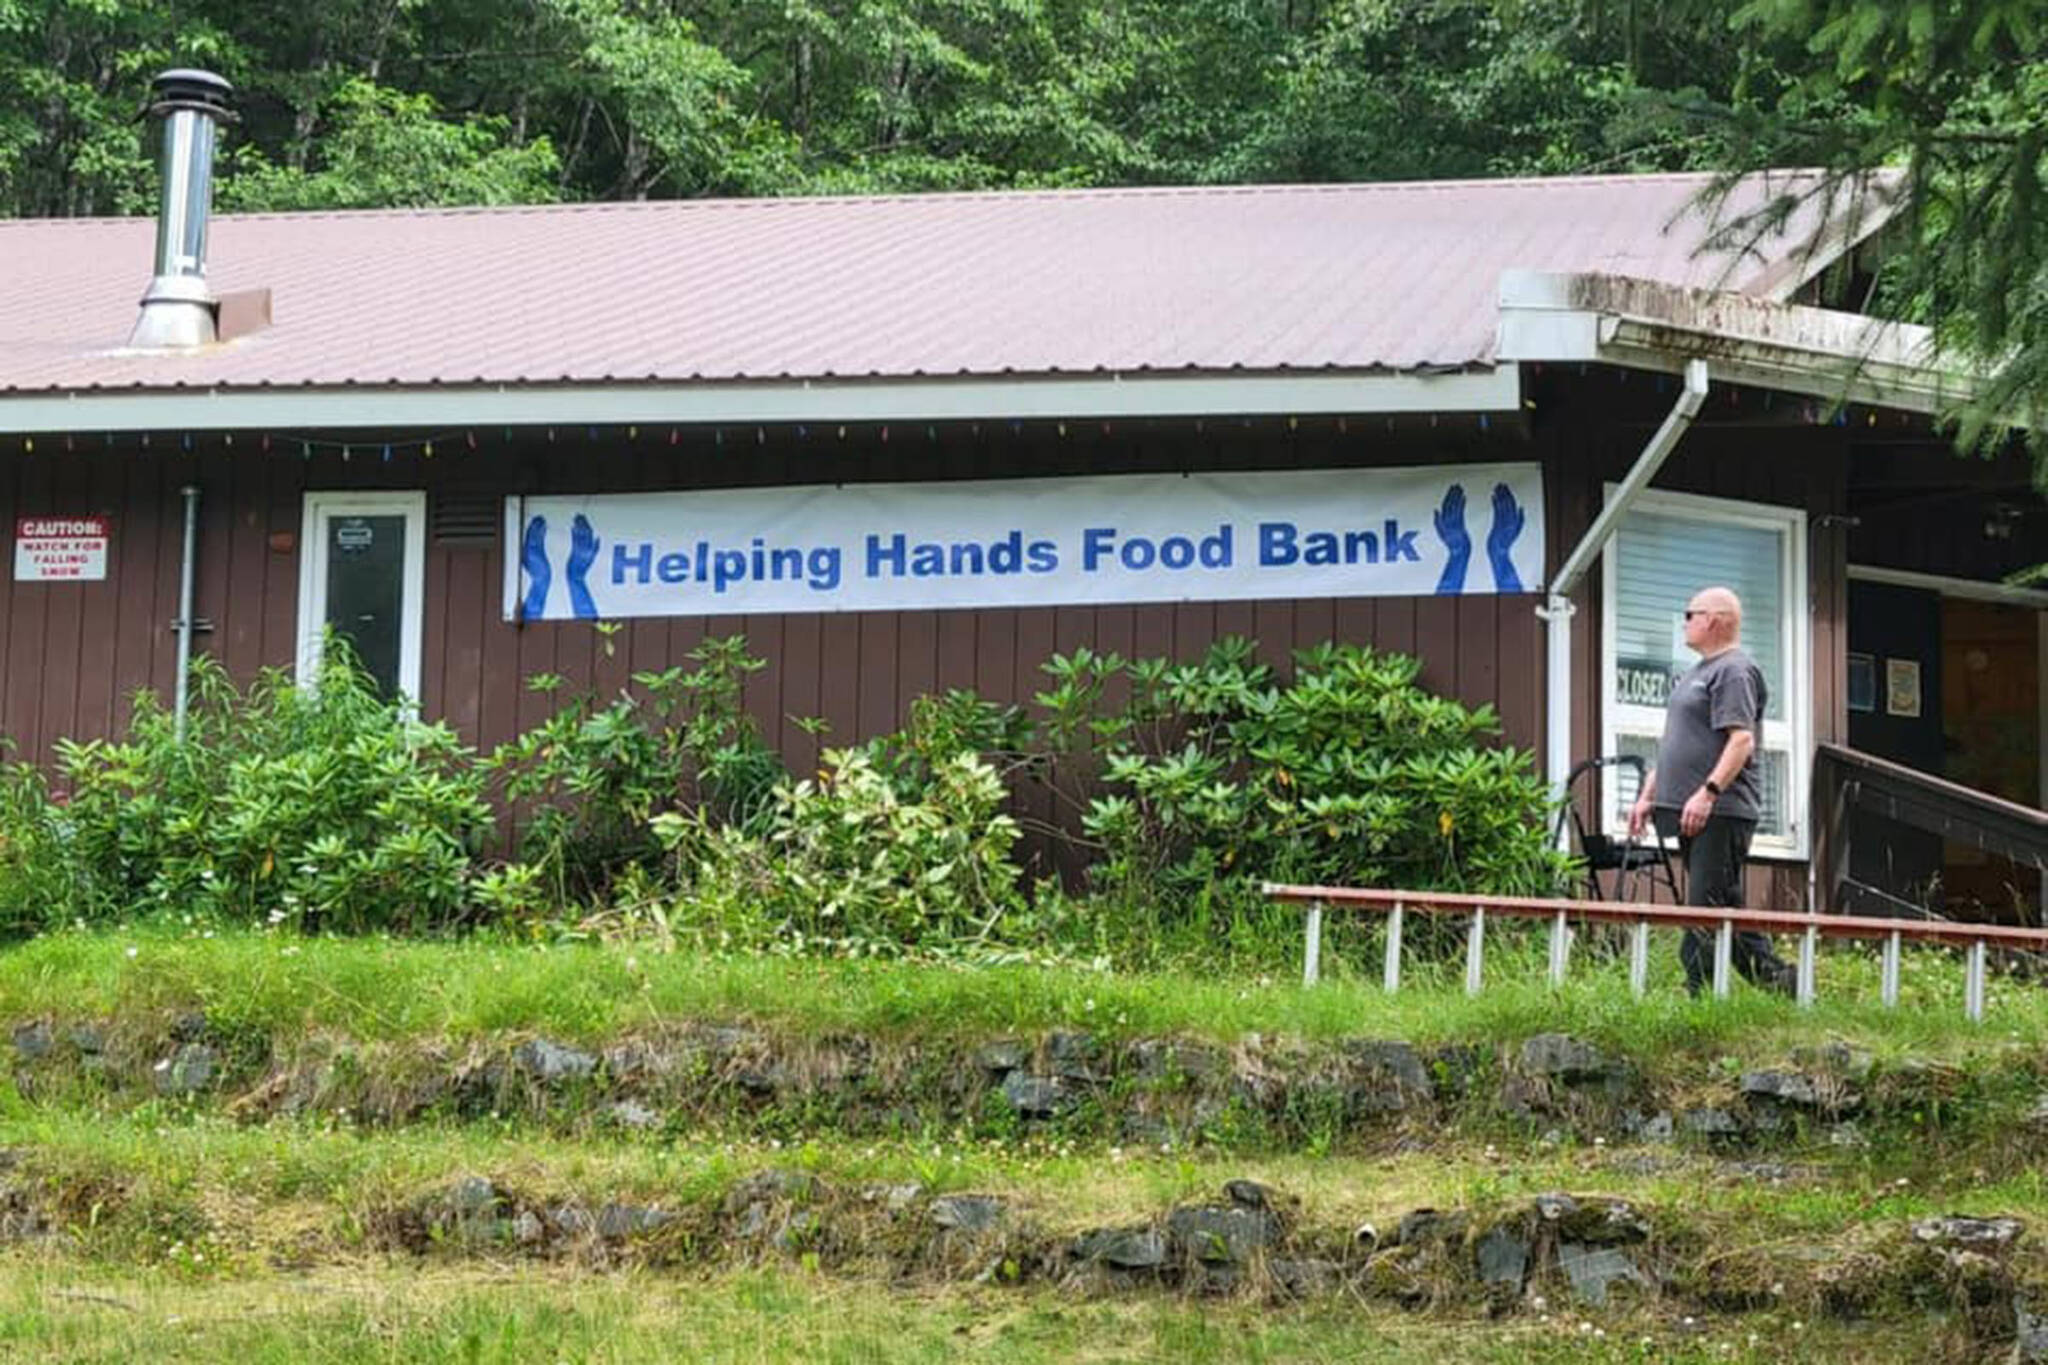 This photo shows Helping Hands Food Bank as it faces potential closure due to a decline in financial assistance and donations. (Courtesy Photo / Helping Hands Food Bank)